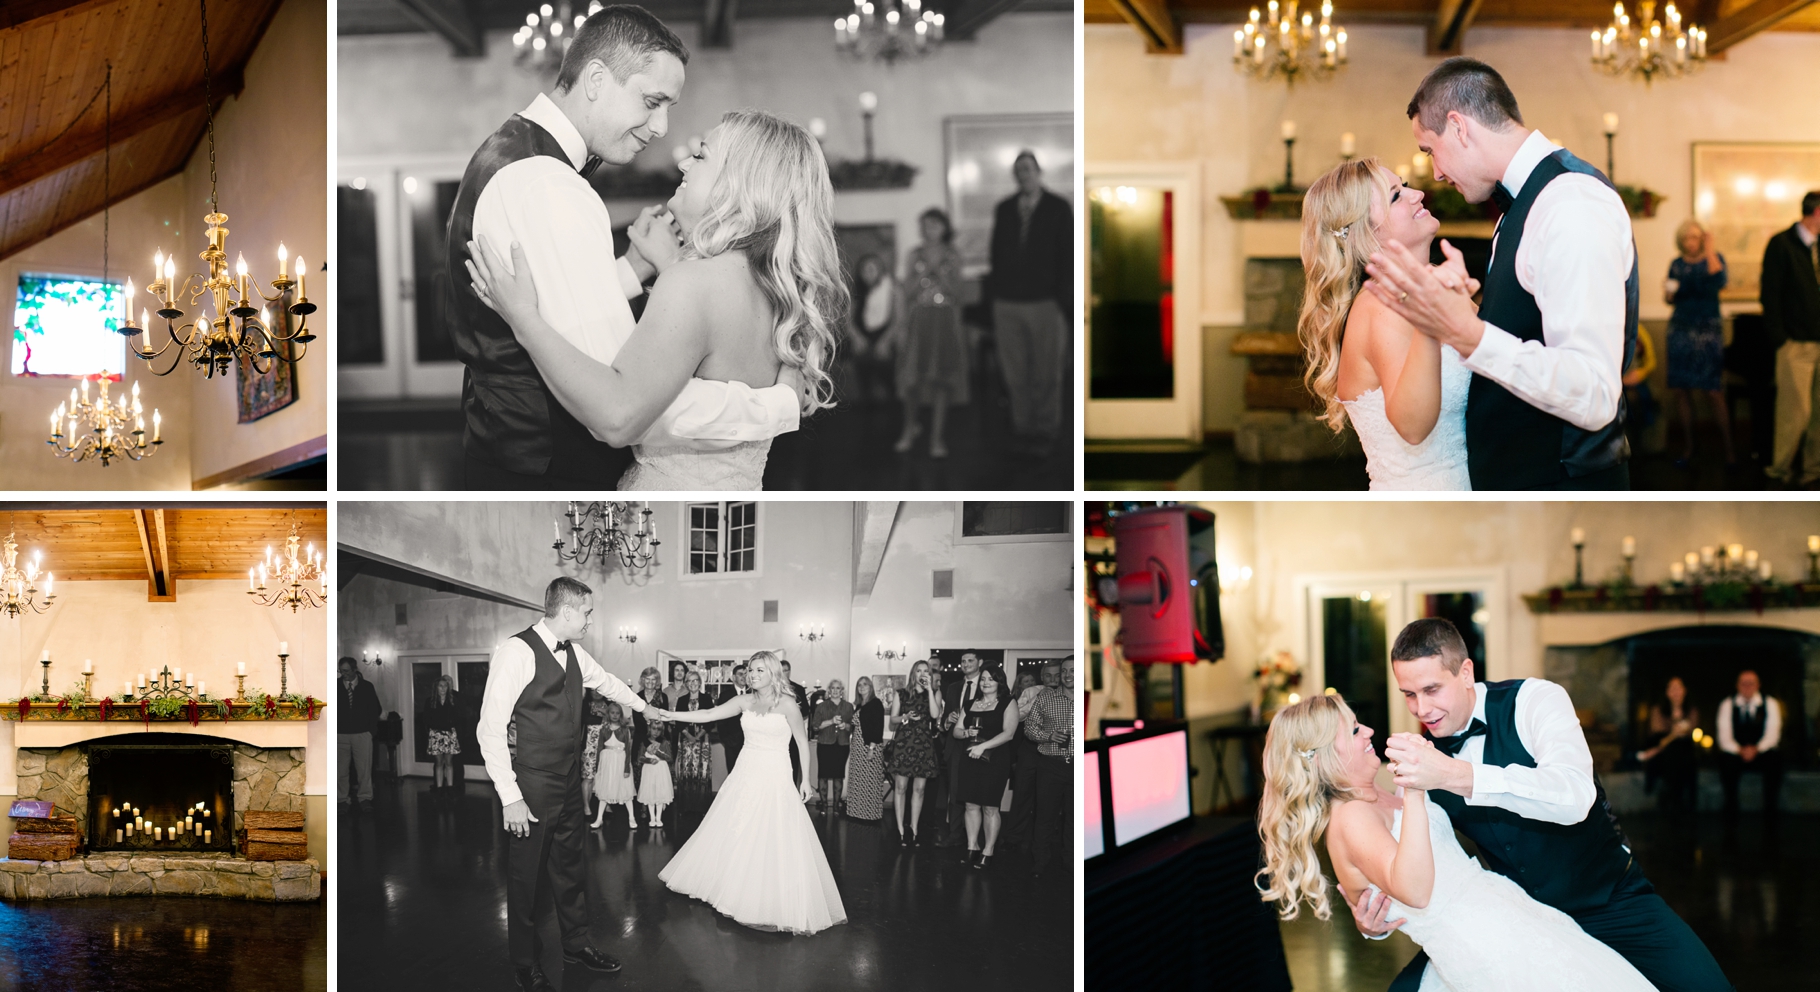 37-Reception-First-Dance-Delille-Cellars-Chateau-Vineyard-Woodinville-Wedding-Photographer-Photography-by-Betty-Elaine